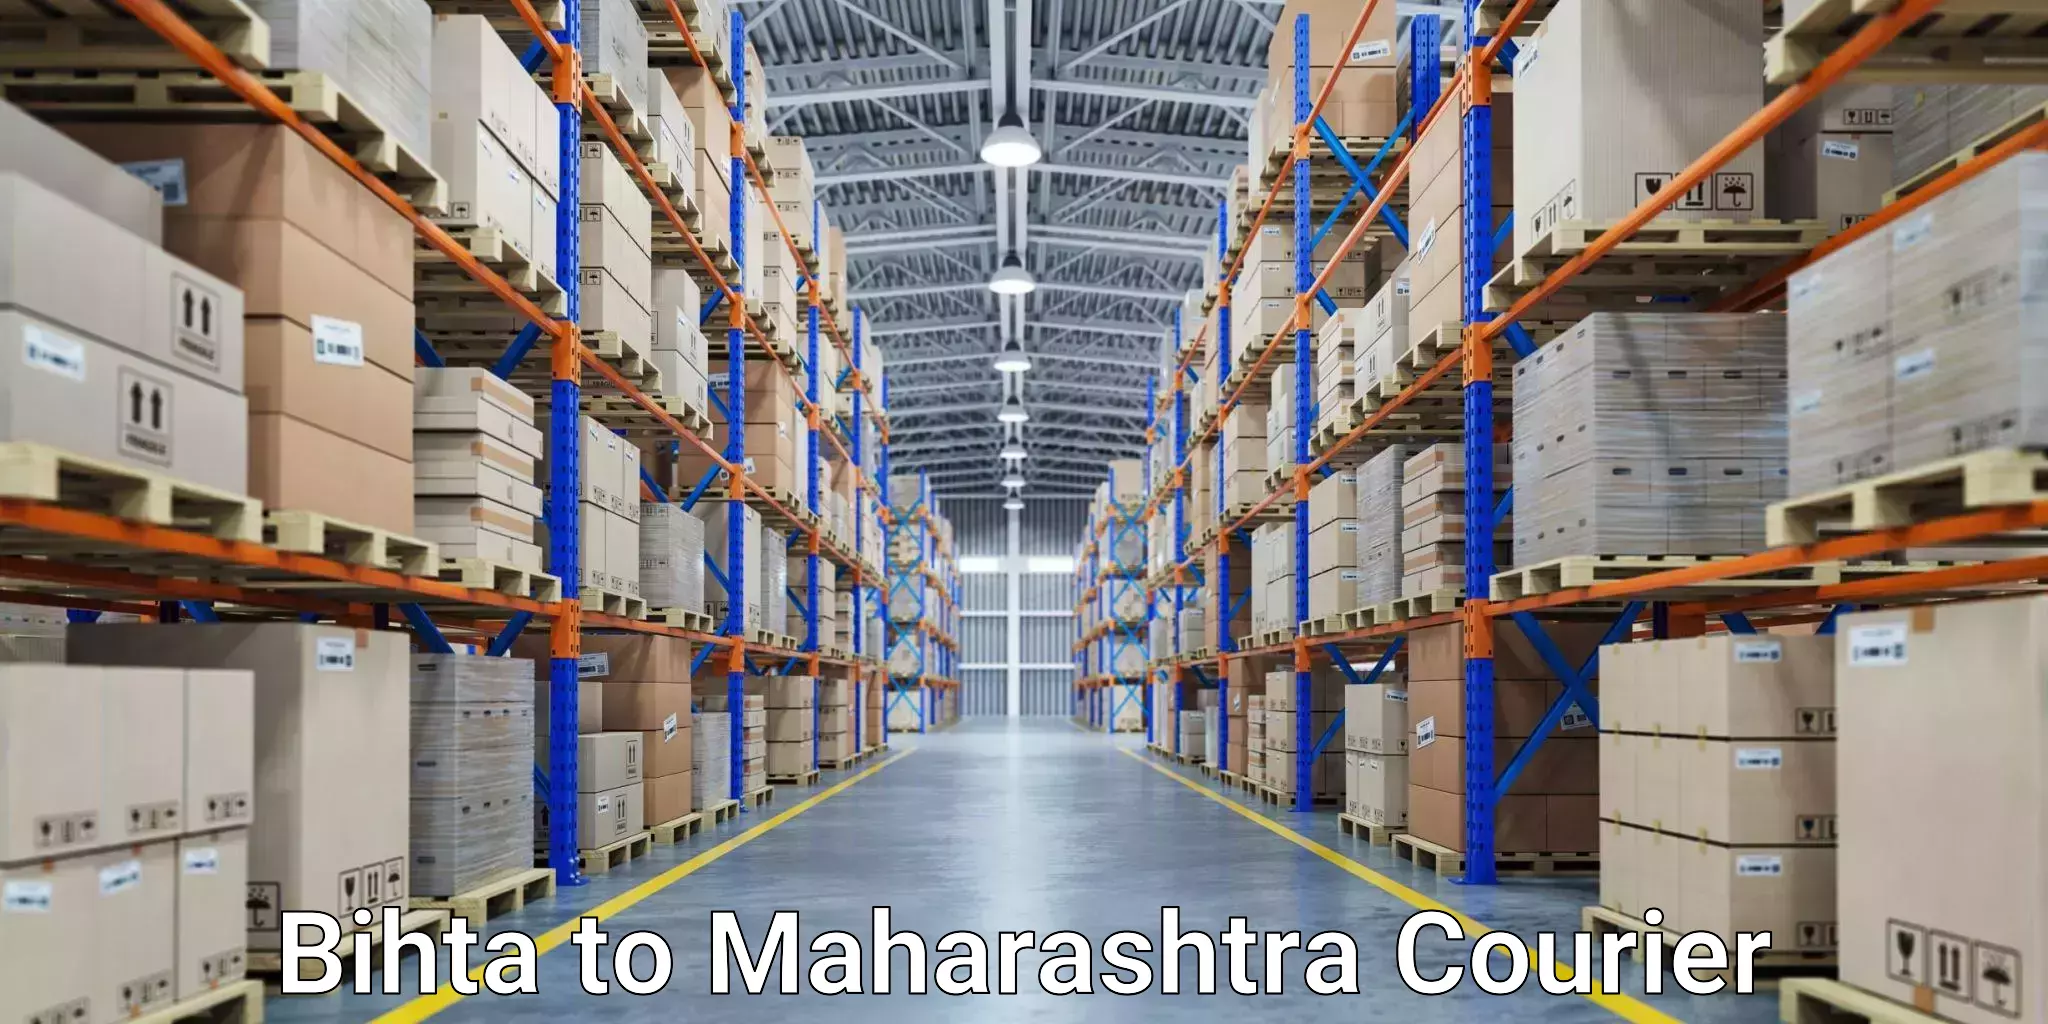 Smart parcel delivery in Bihta to Nagpur